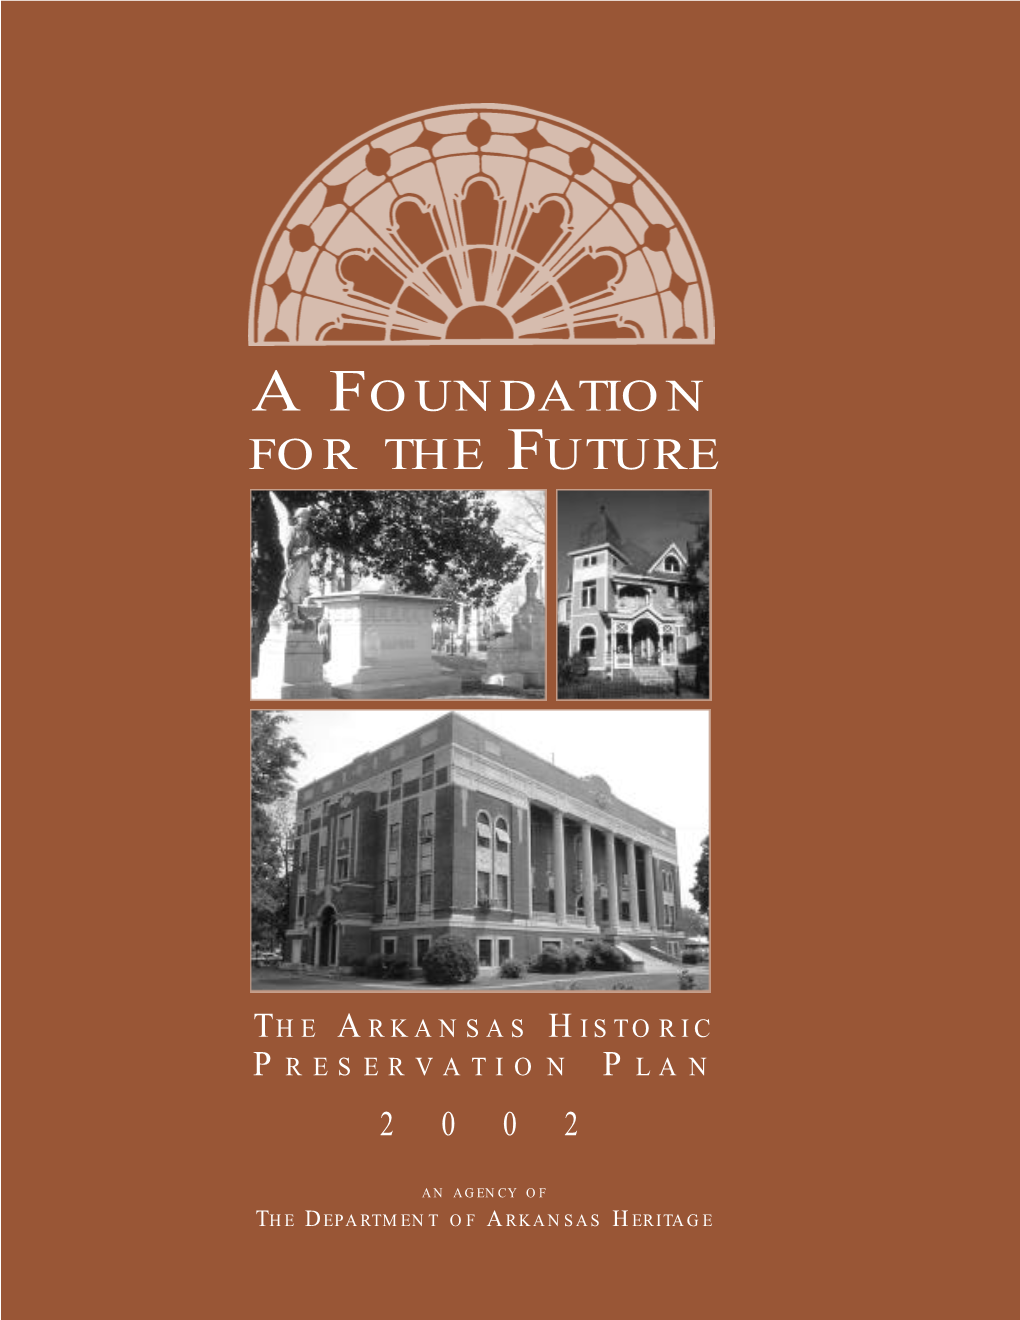 A Foundation for the Future